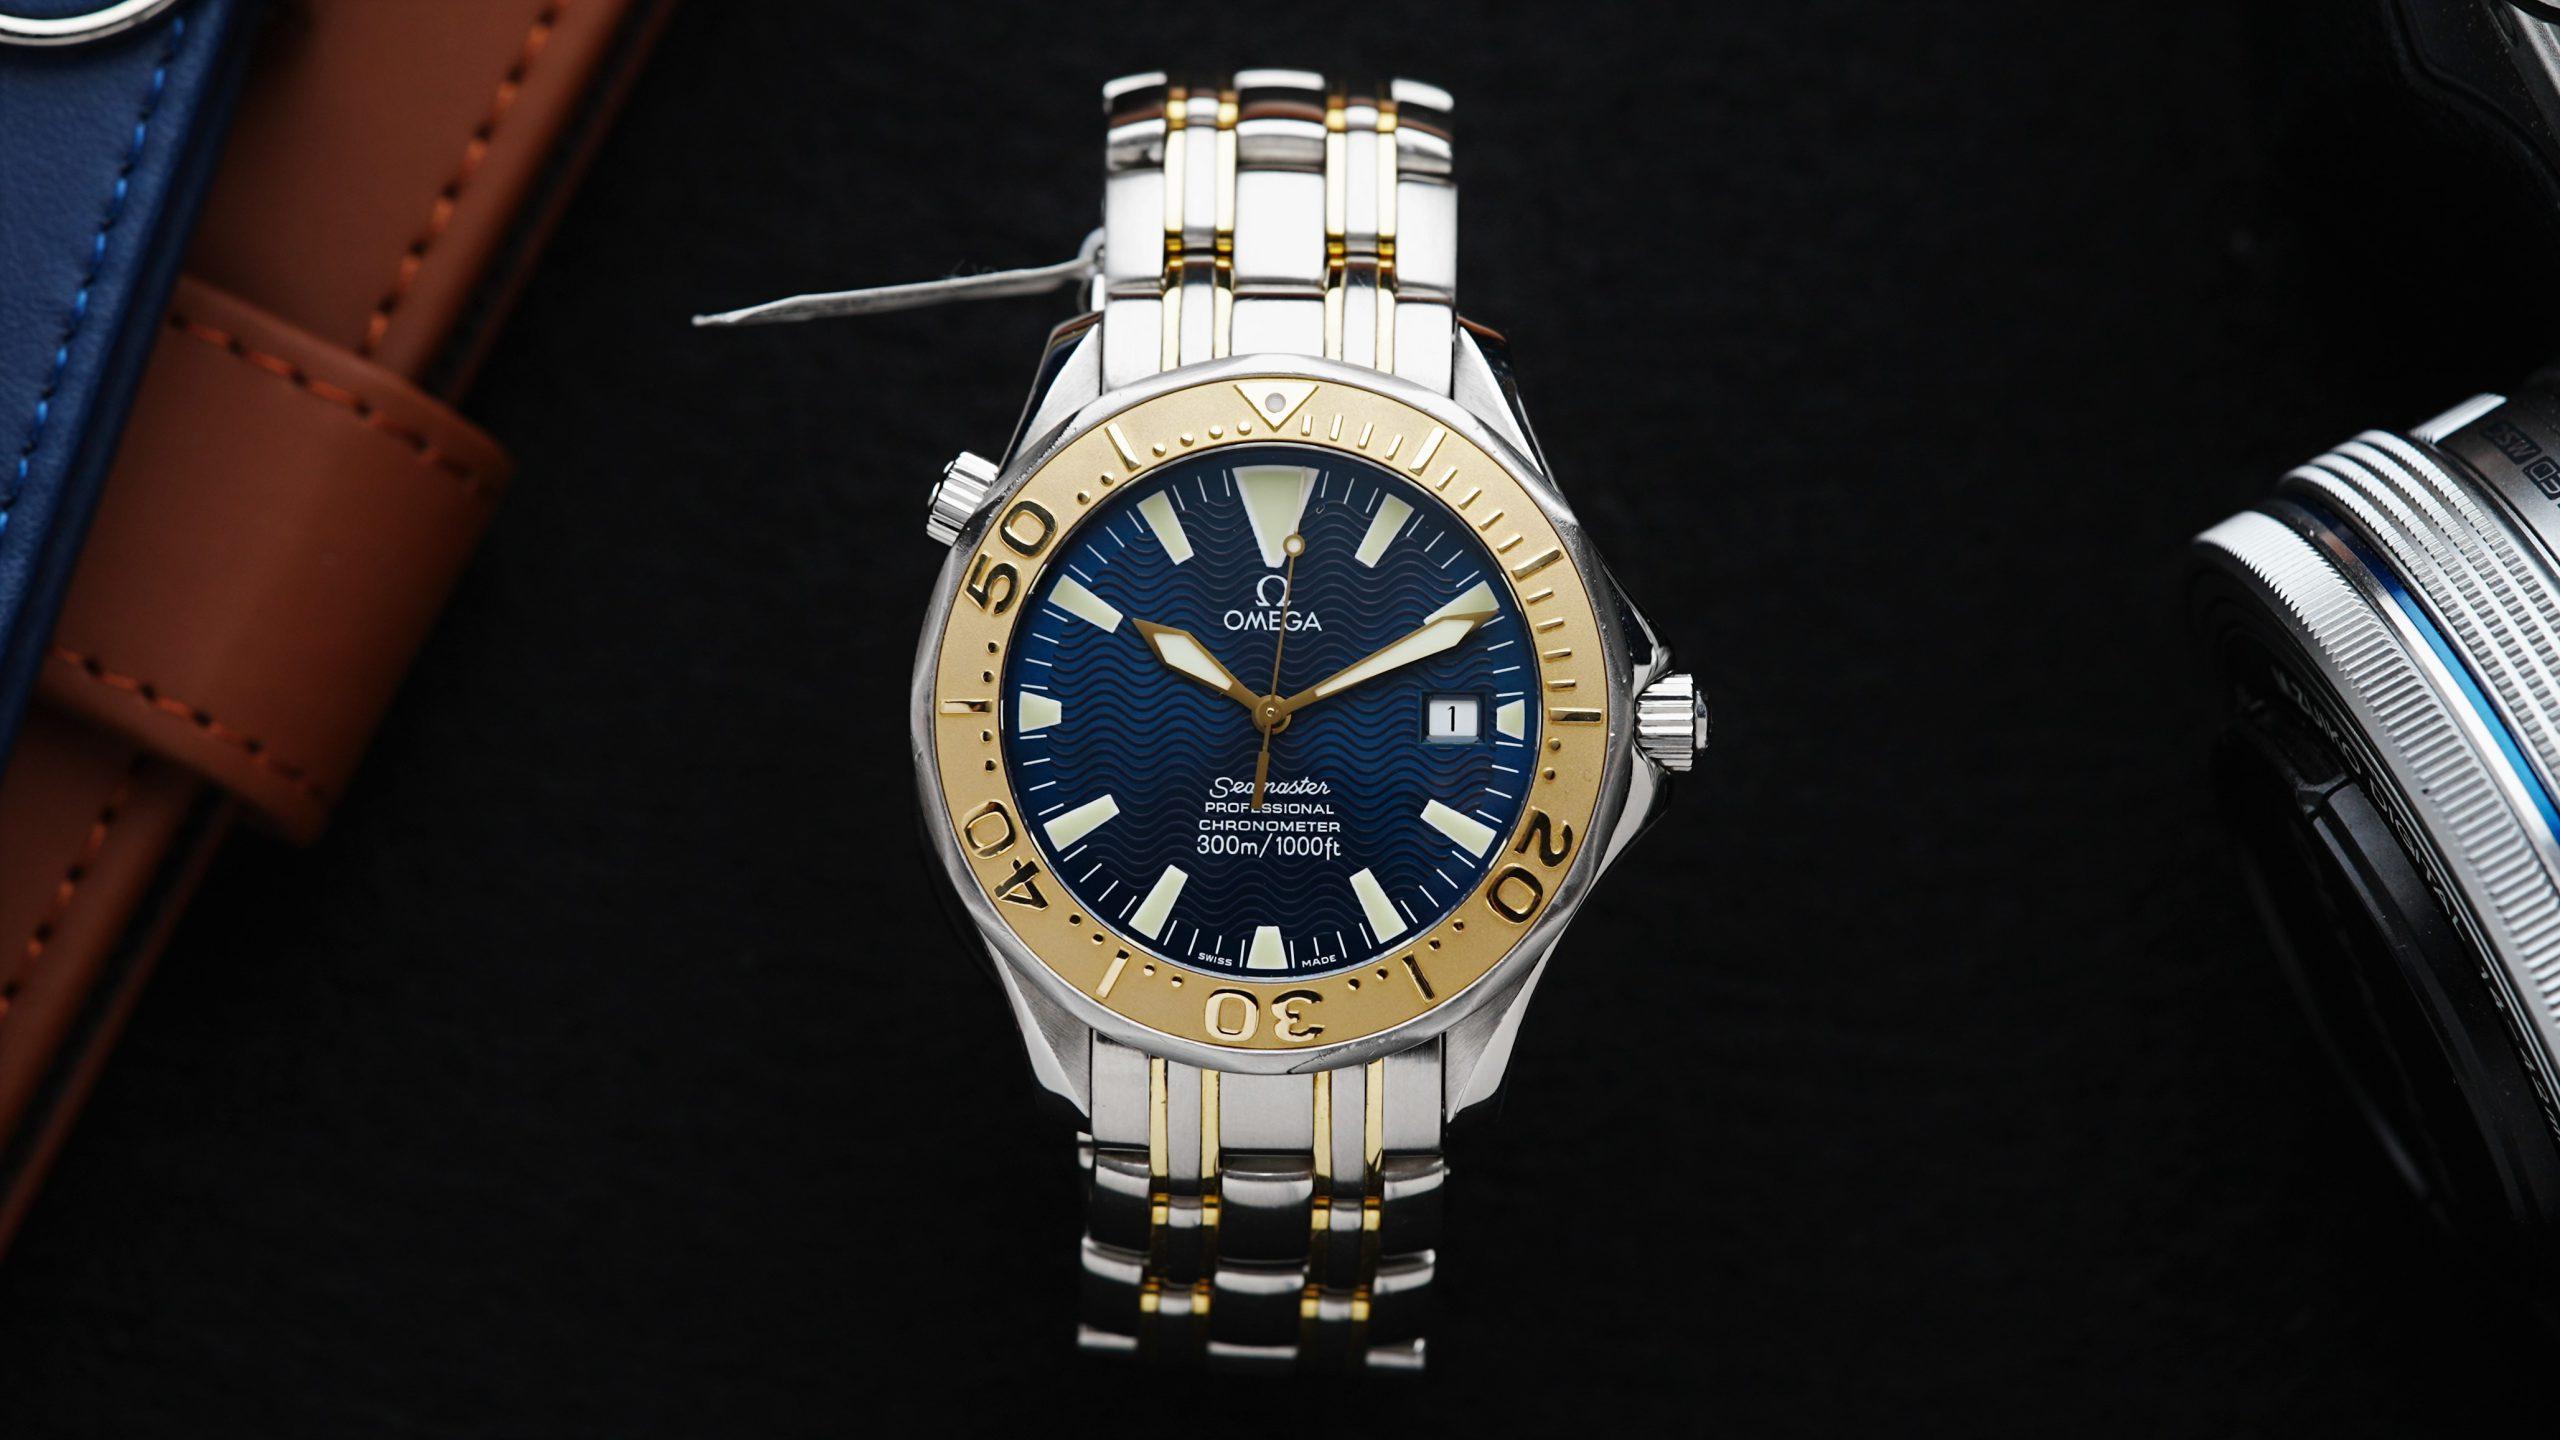 Omega Seamaster Sword Hands Gold & Steel Blue Dial Rare featured under white lighting.